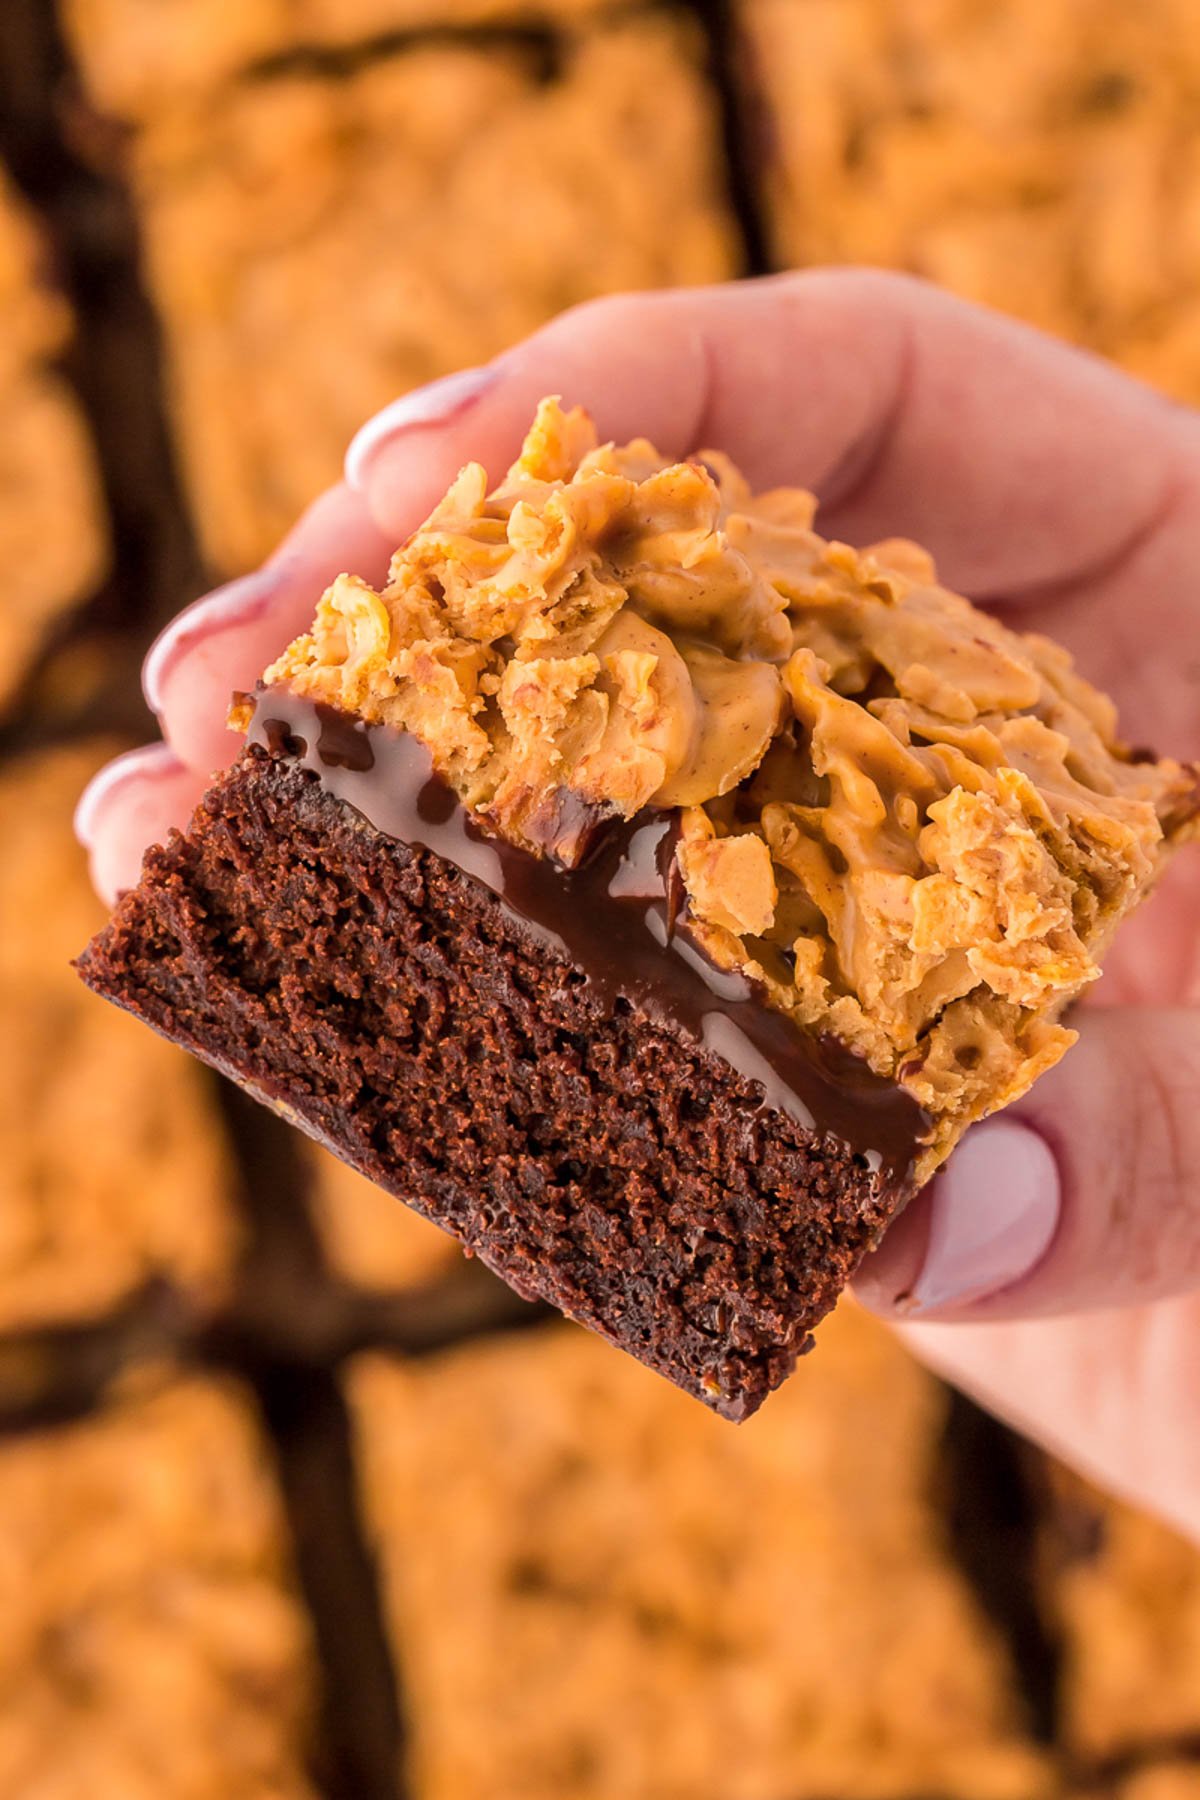 A woman's hand holding a peanut butter crunch brownie to the camera.